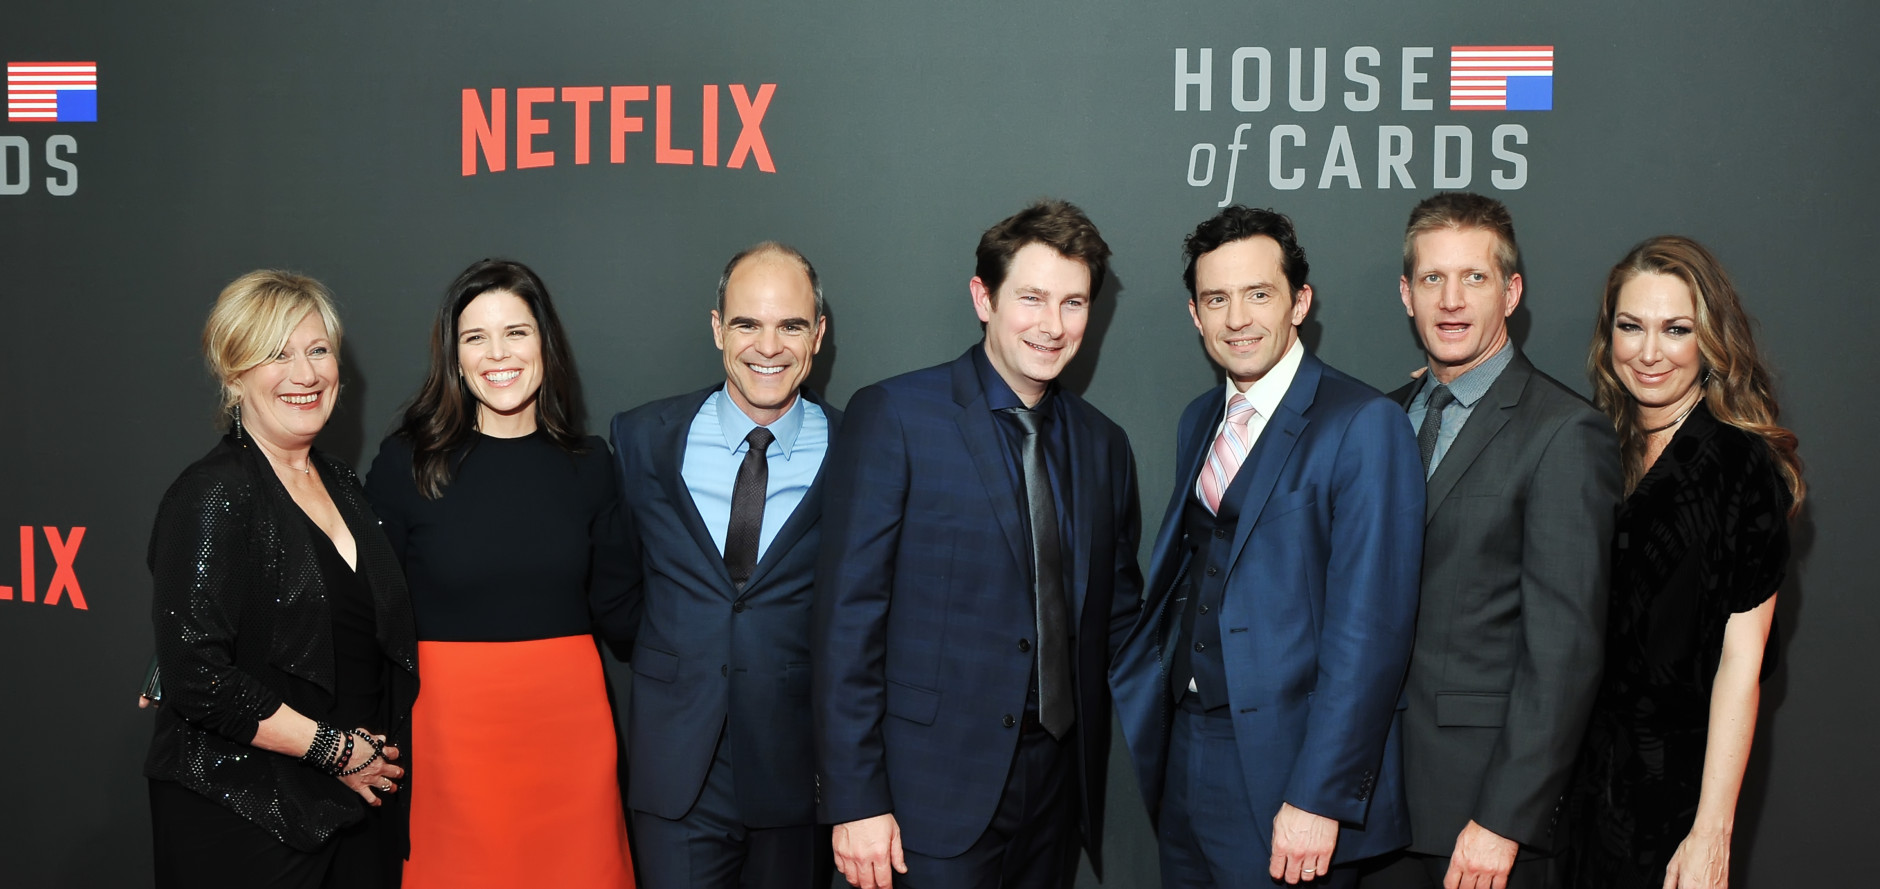 “House of Cards” Season 4 cast members pose on the red carpet in D.C. on Feb. 22, 2016.  (Courtesy Shannon Finney, www.shannonfinneyphotography.com)